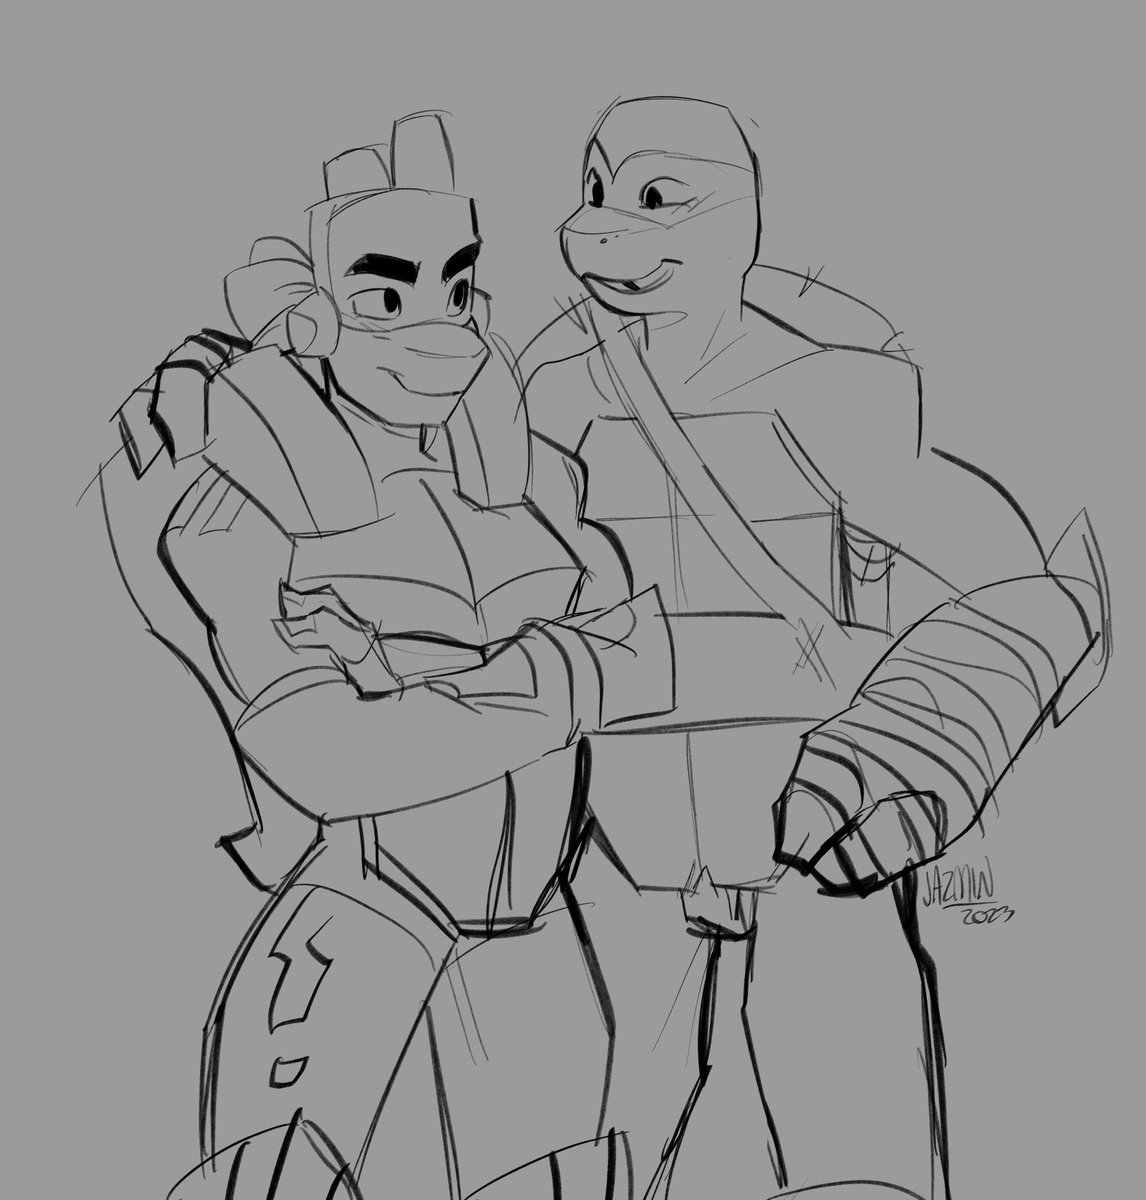 Just found out this goofer is as tall as Raph in rise so is three inches taller than rise Donnie o(-(